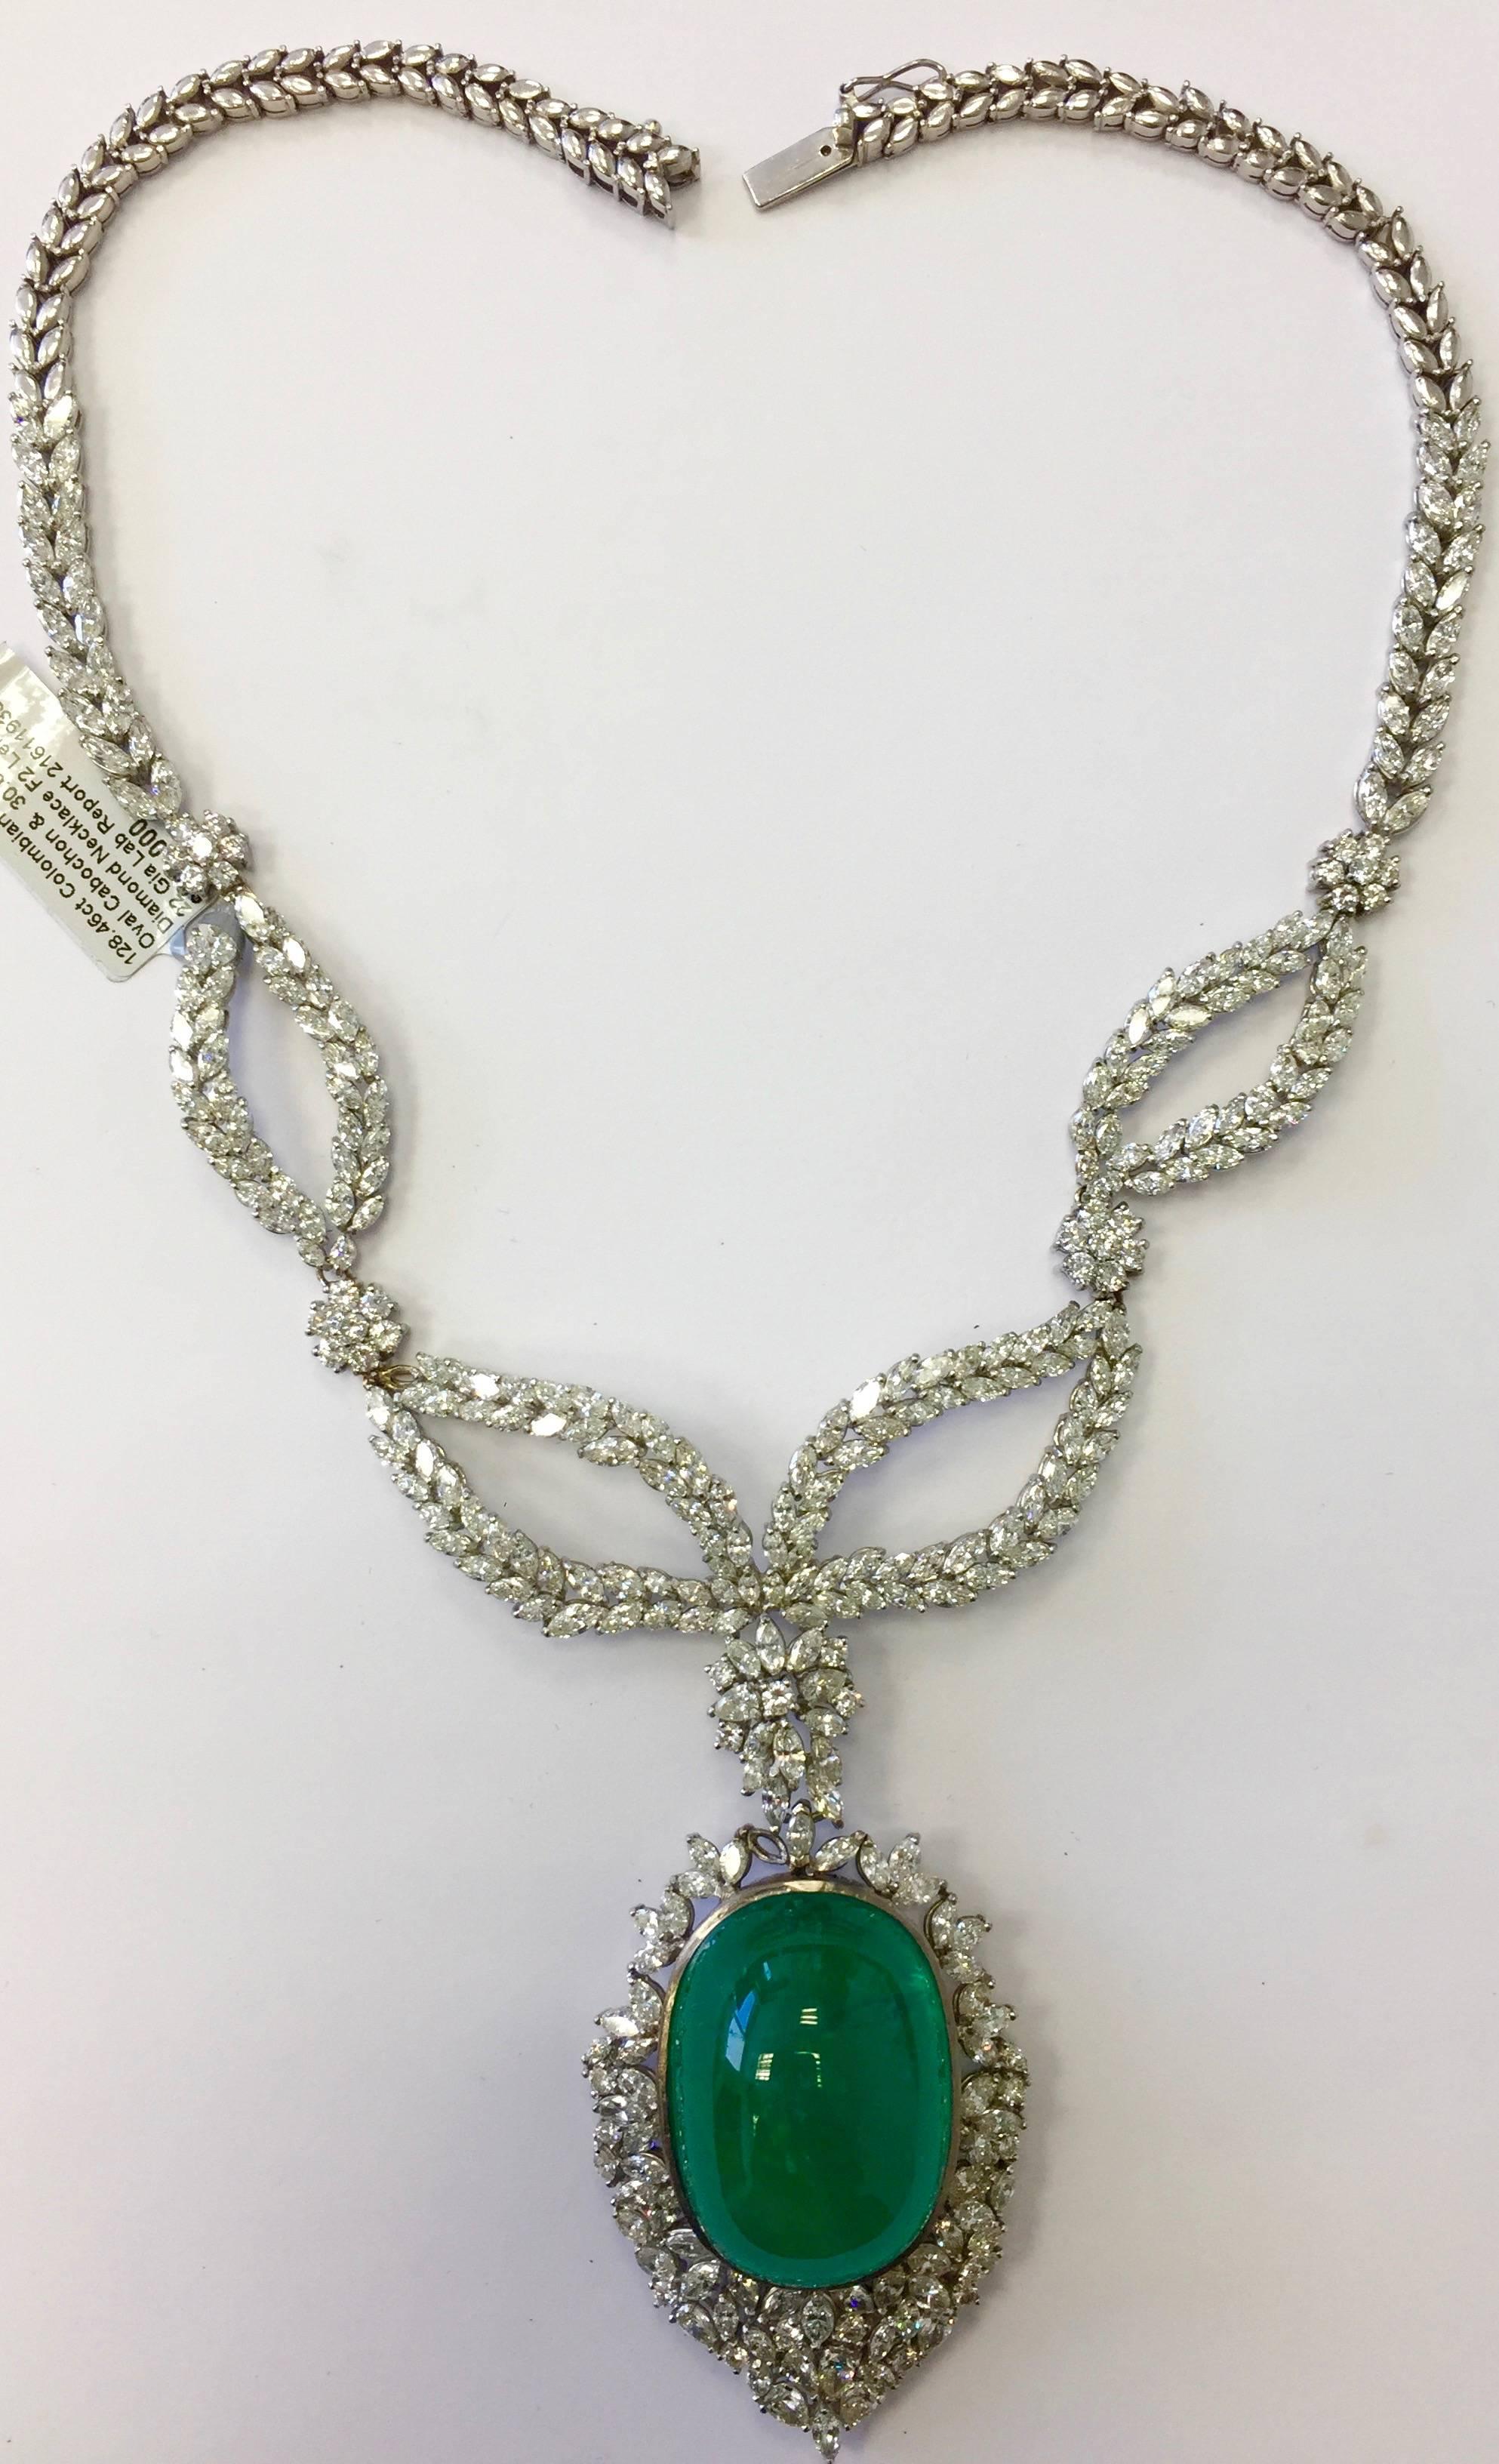 Gorgeous emerald cabochon and diamond necklace featuring a 128.46 ct emerald cabochon with 30.00 ct of diamonds! This piece is exquisite and perfect for someone who really loves jewelry. This necklace was once owned by the princess of Bahrain. 
It's